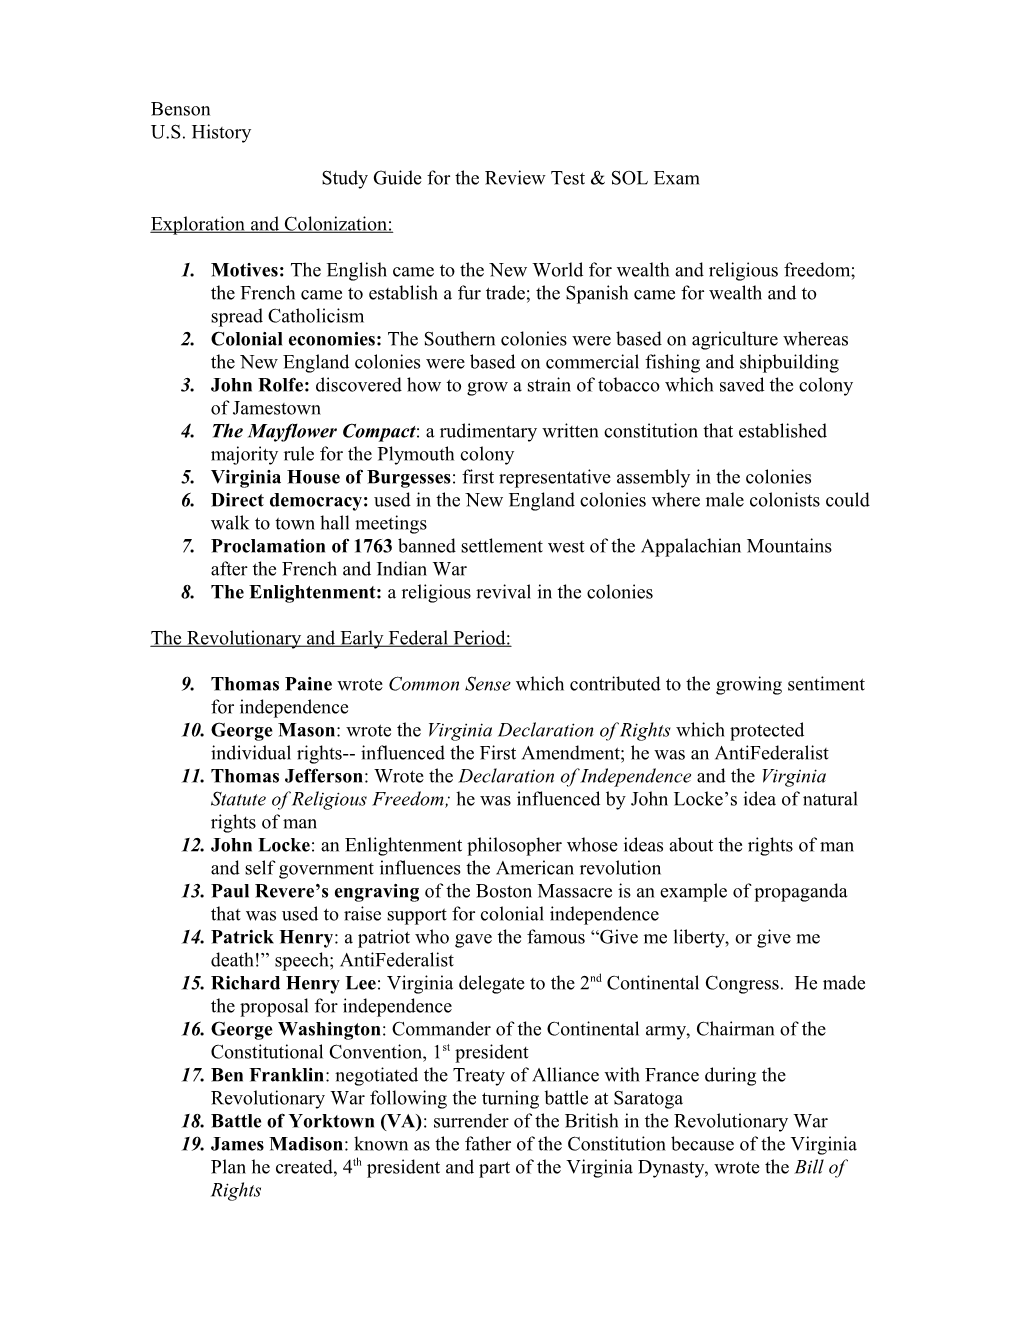 Study Guide for the Review Test & SOL Exam